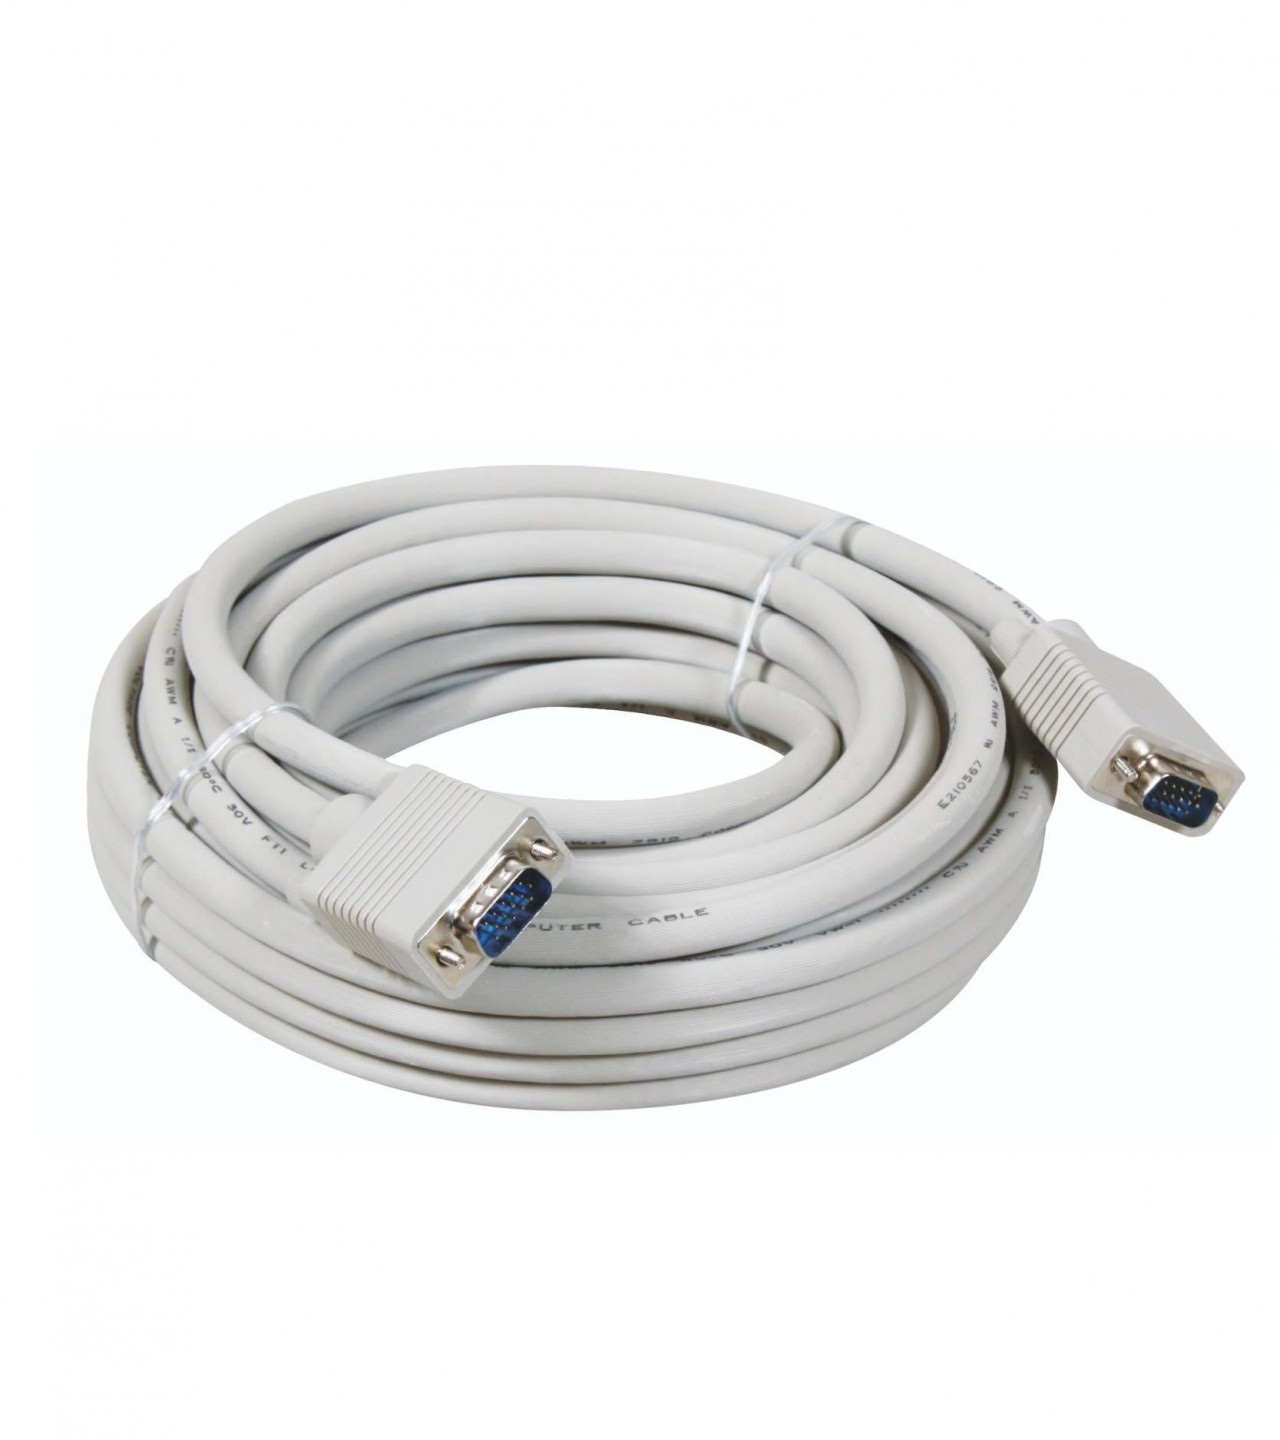 Vga Cable Male To Male OD 8MM 20m